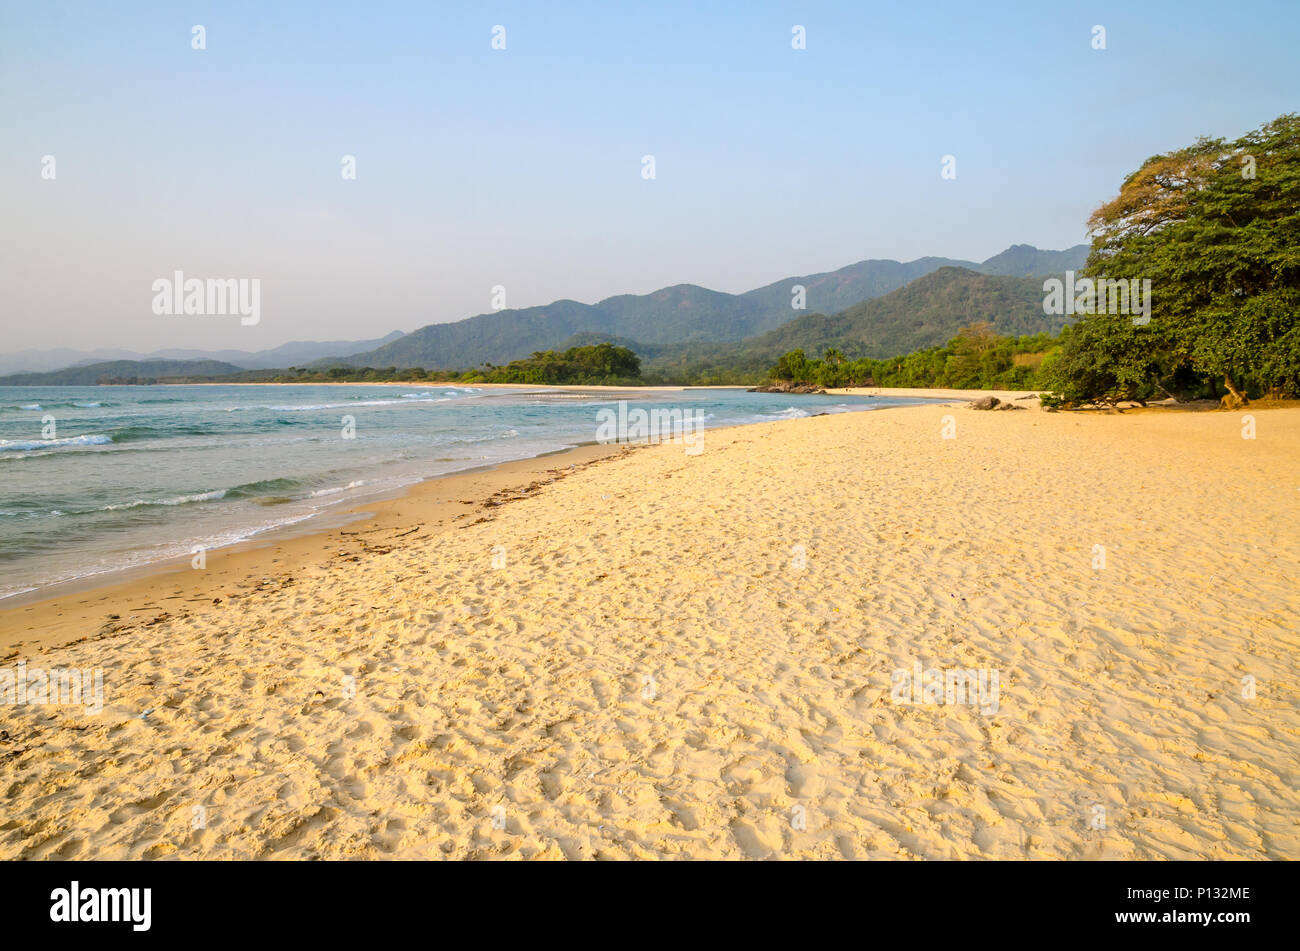 Beautiful Bureh Beach in the afternoon with yellow sand, green trees, sea and mountains, Sierra Leone, Africa Stock Photo